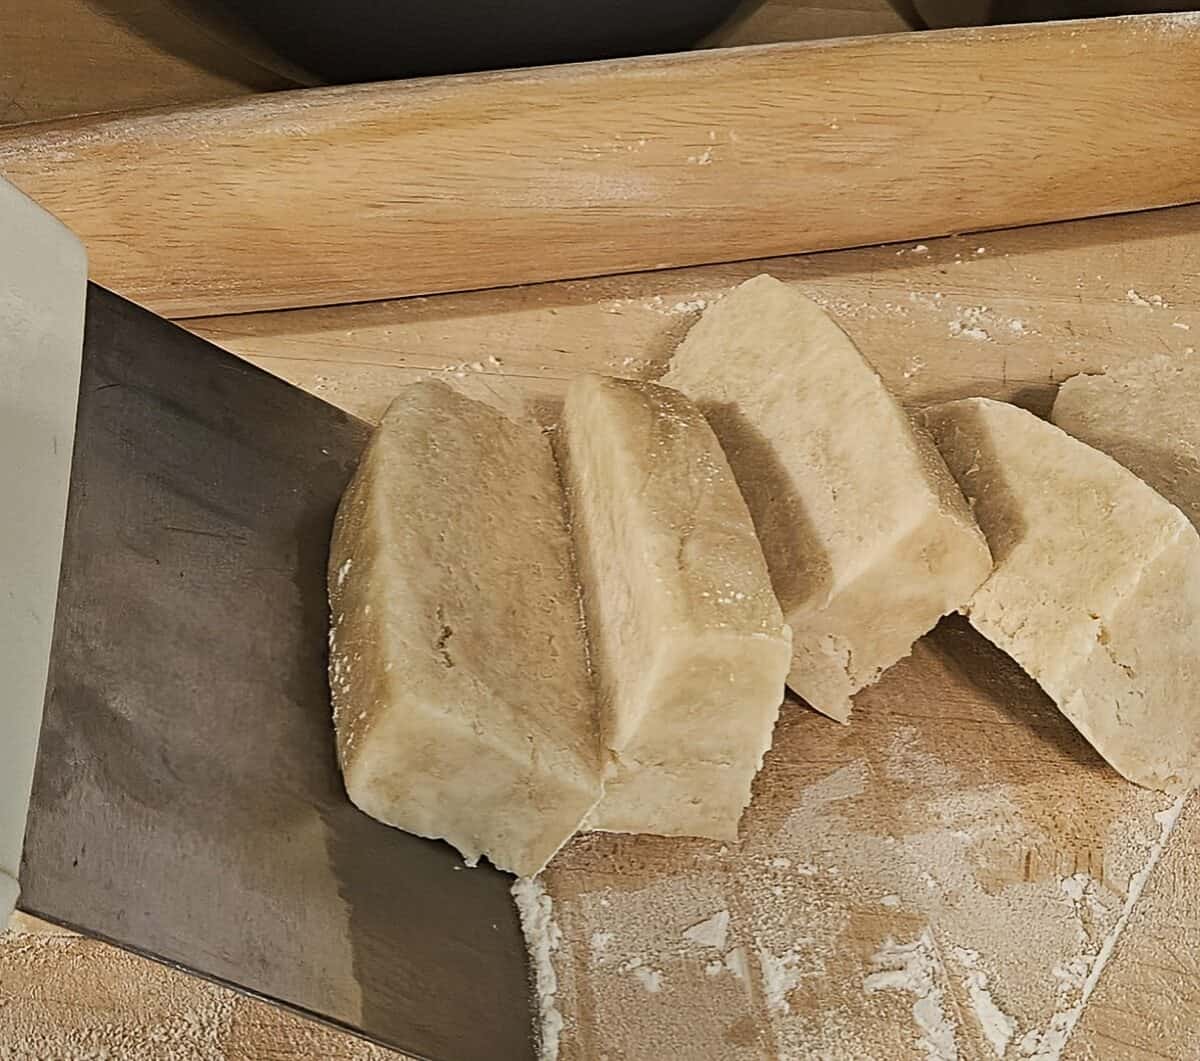 pie dough cut into small rectangular pieces with dough blade on floured cutting board